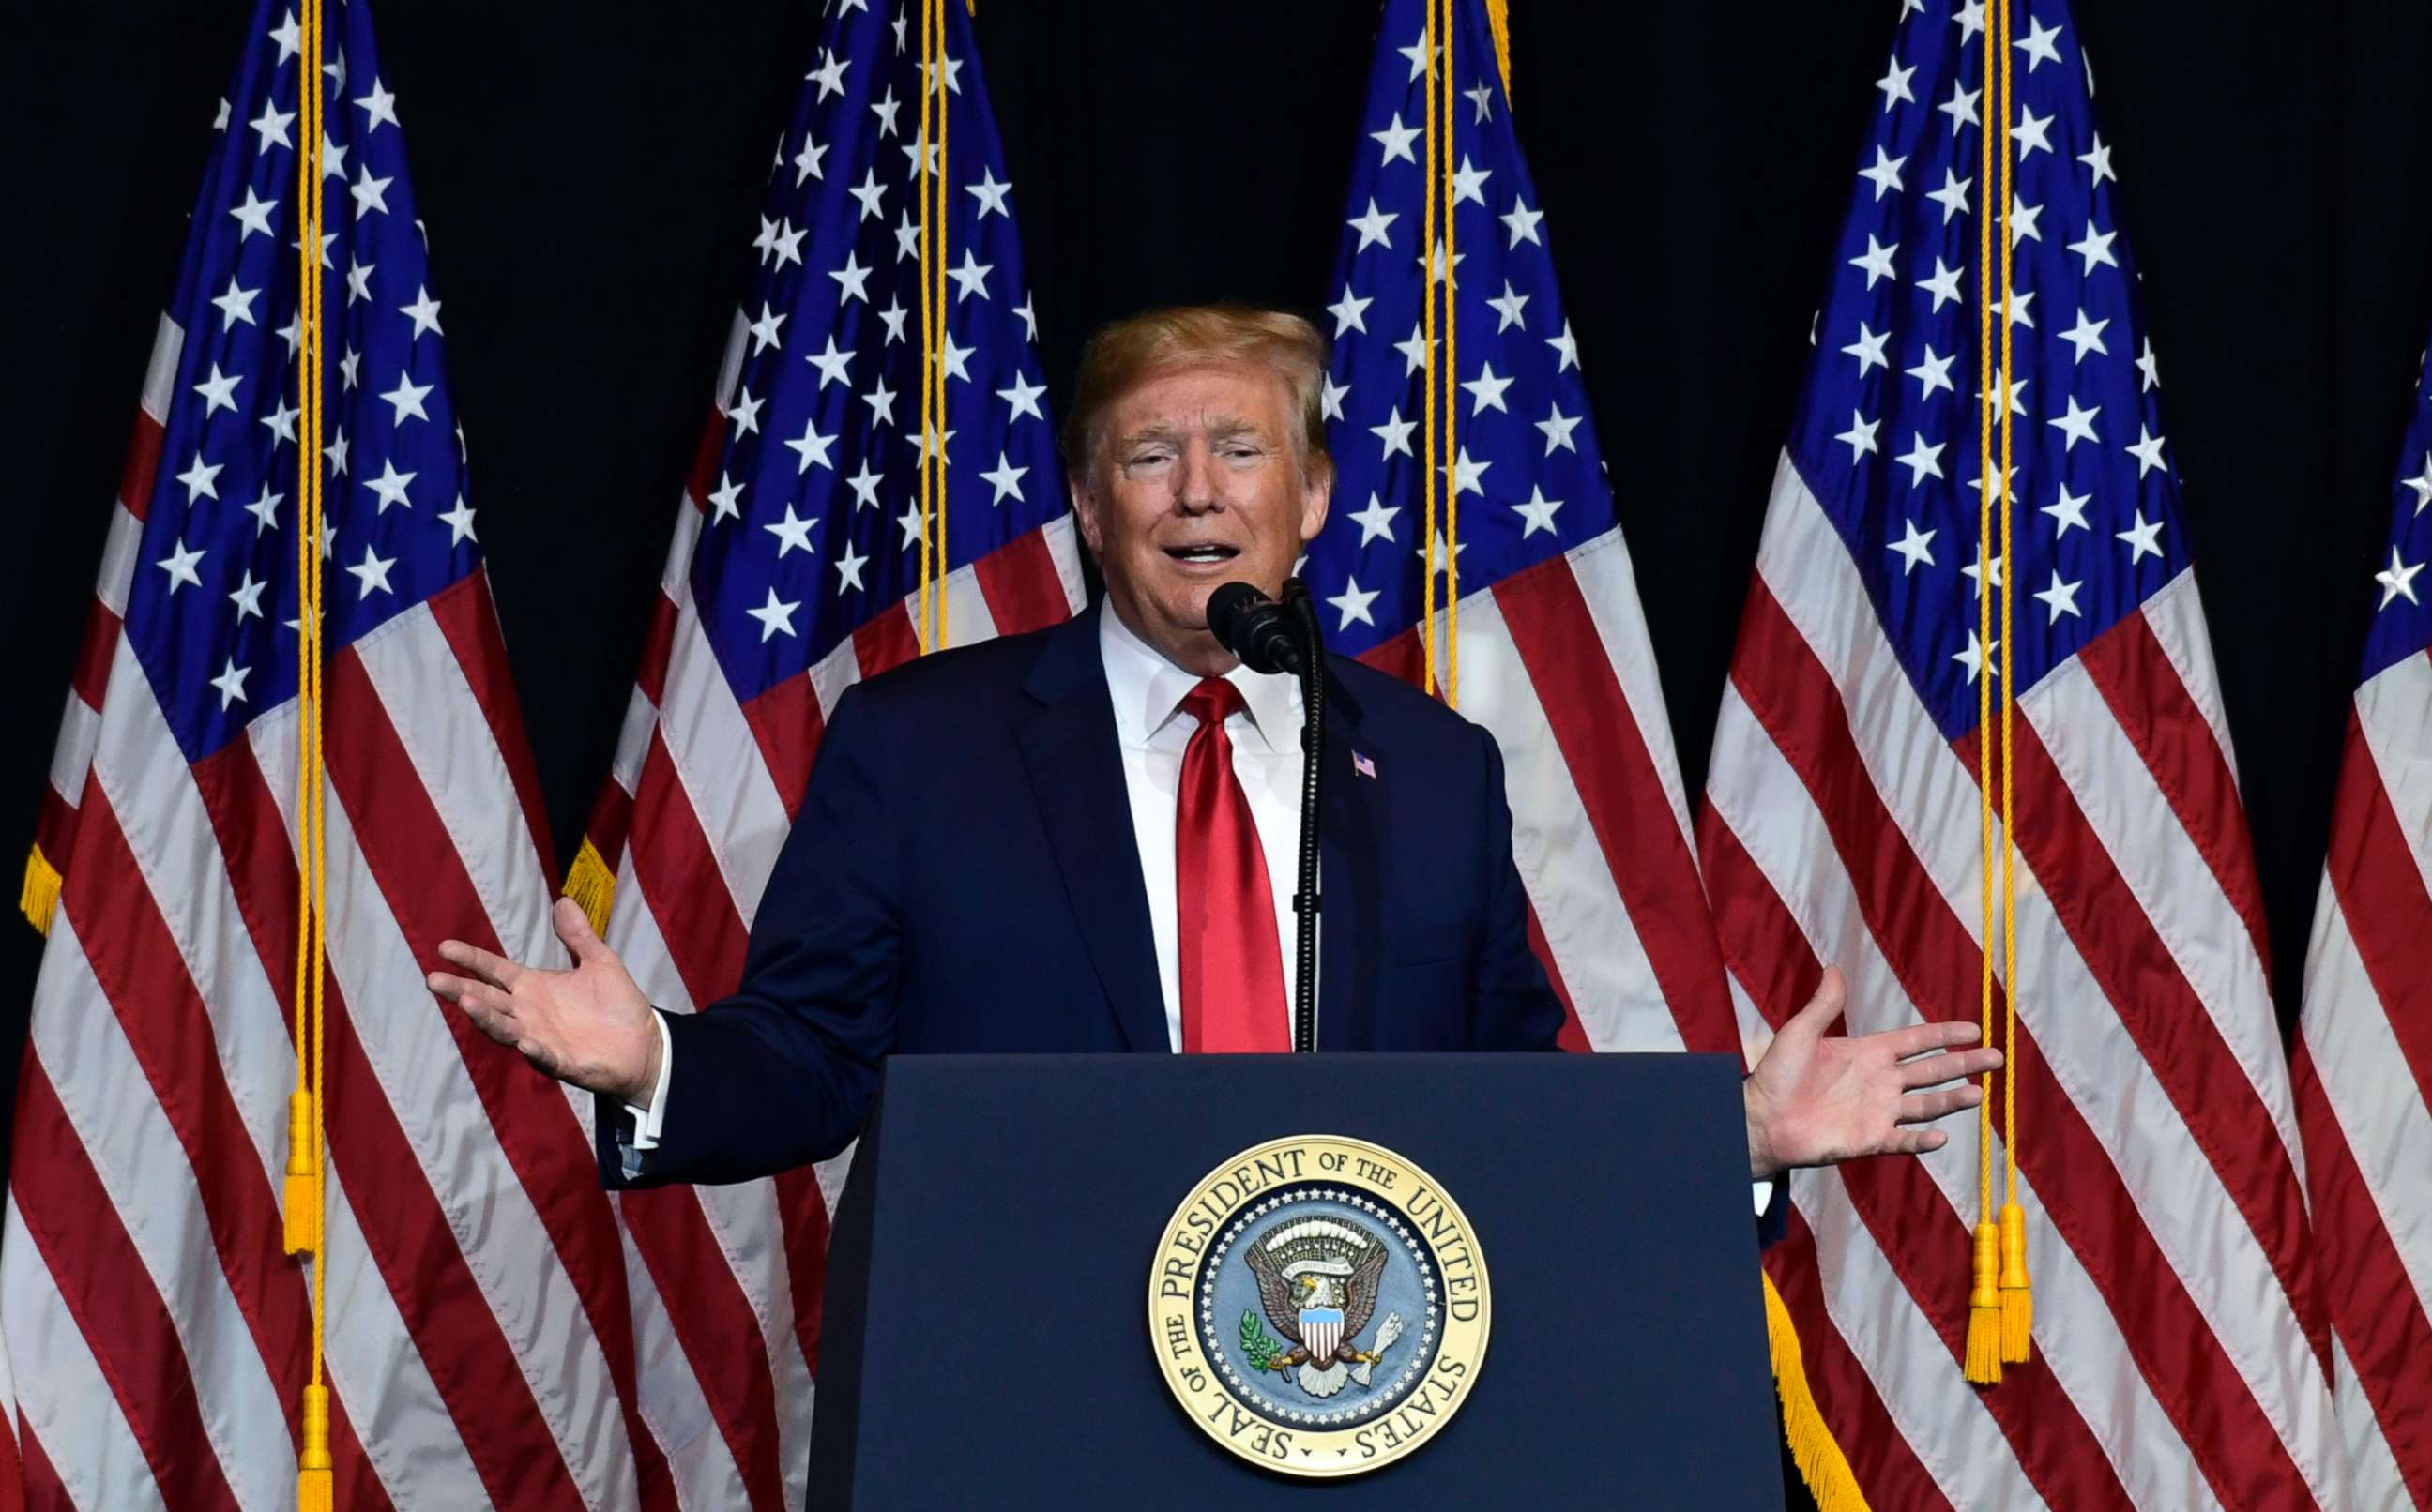 PHOTO: President Donald Trump speaks during a fundraiser in Sioux Falls, S.D., Sept. 7, 2018.